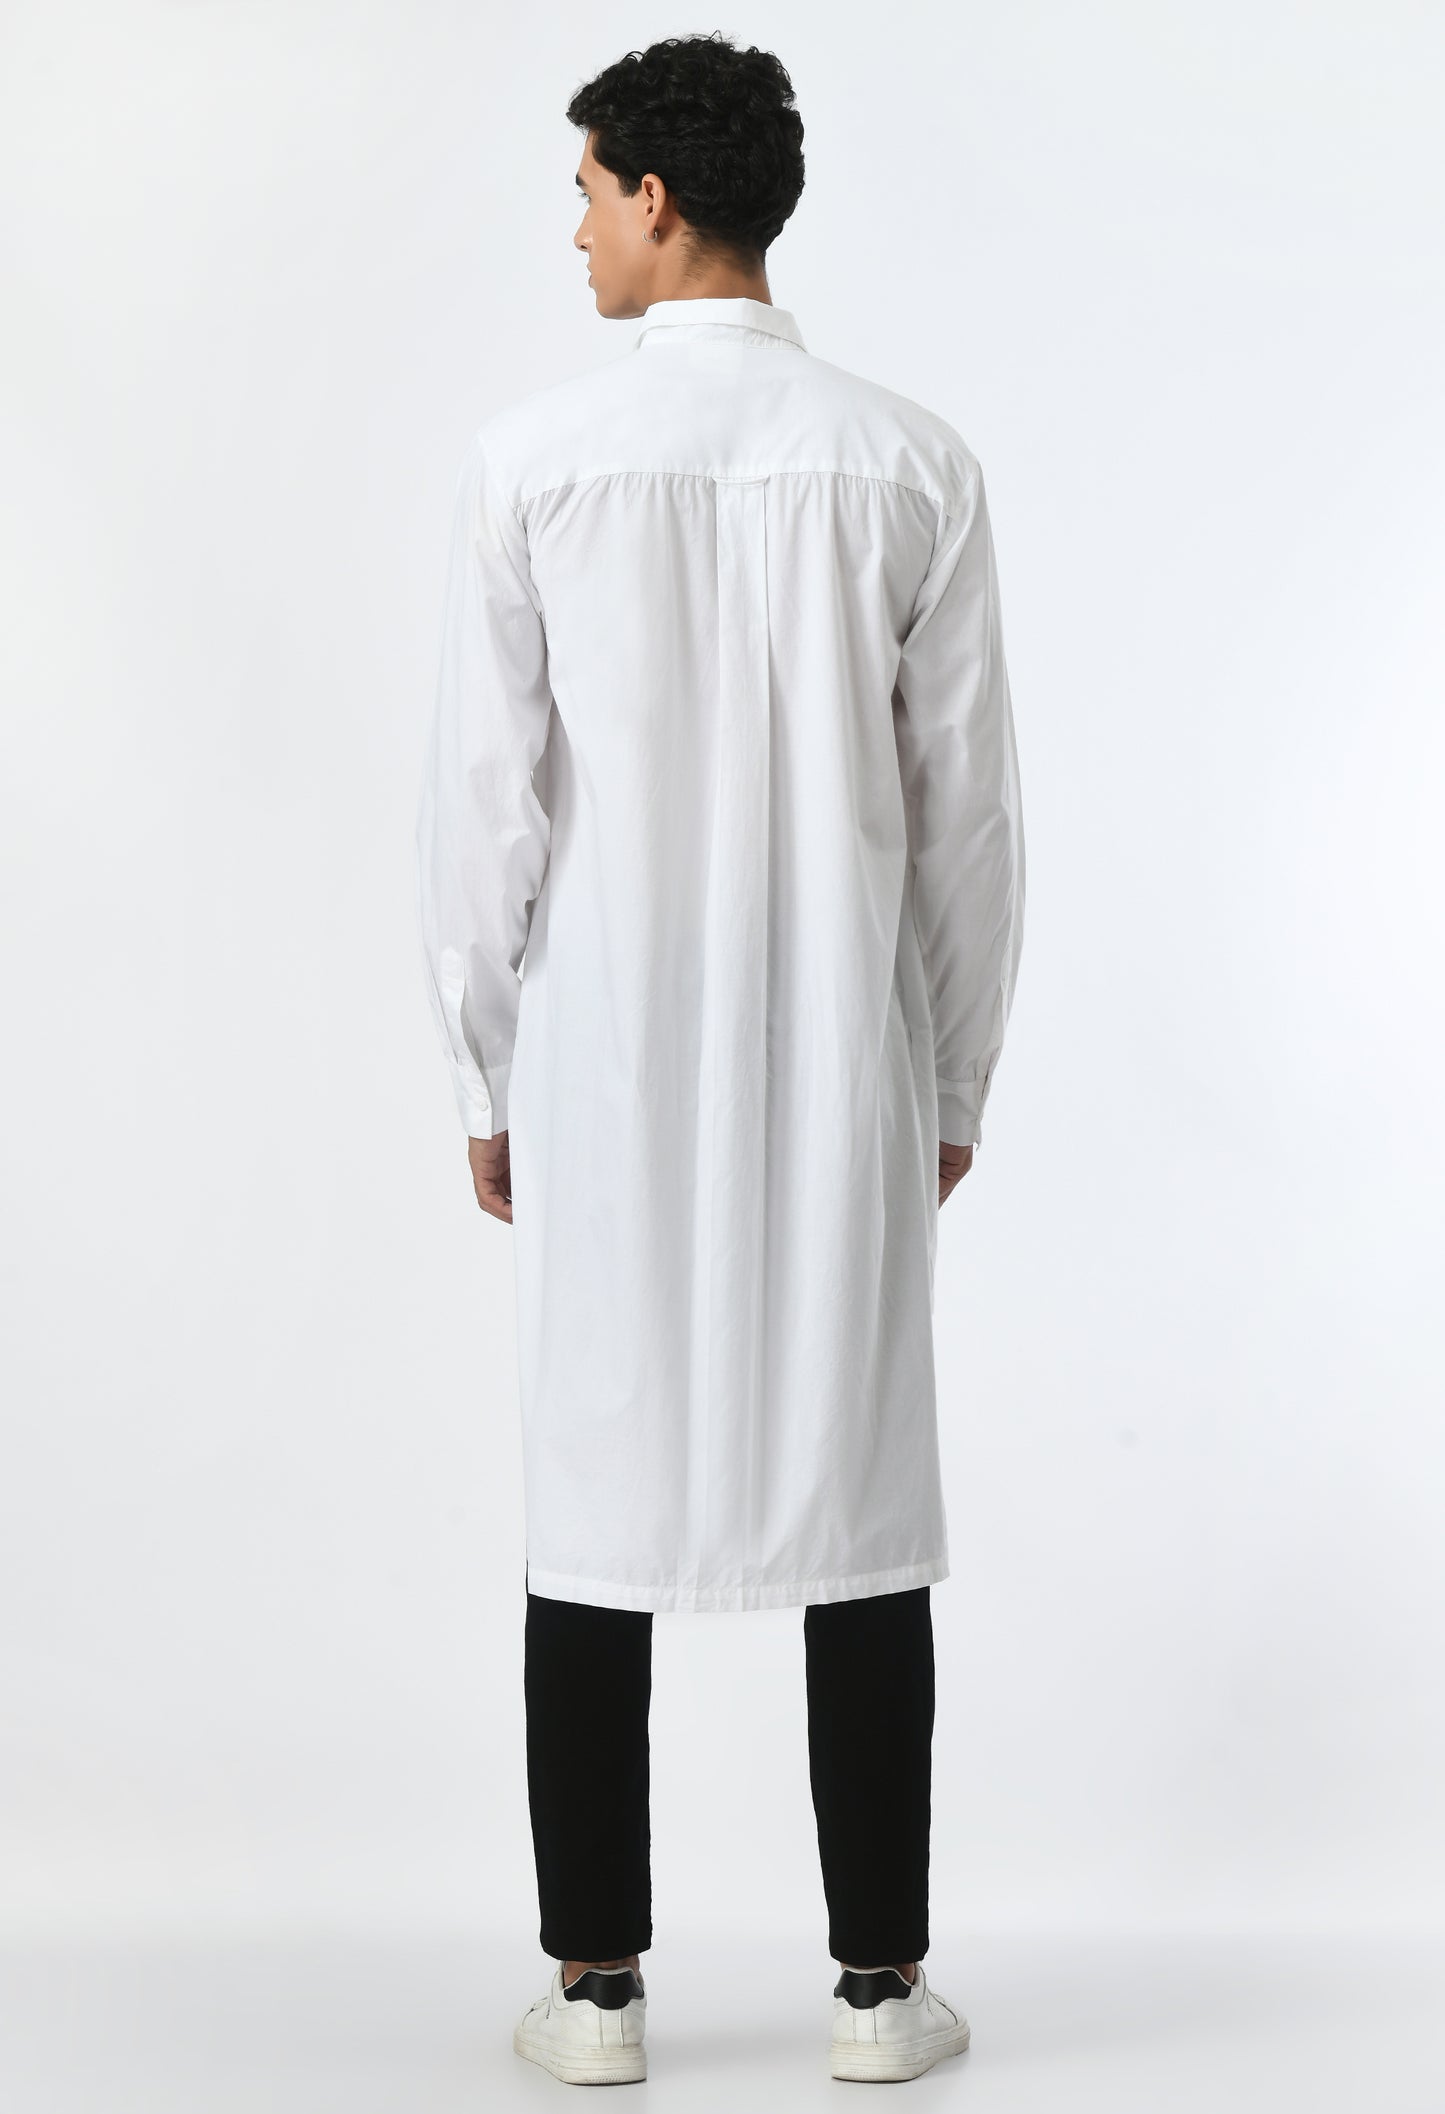 White unisex loose-fit high-low cut shirt.